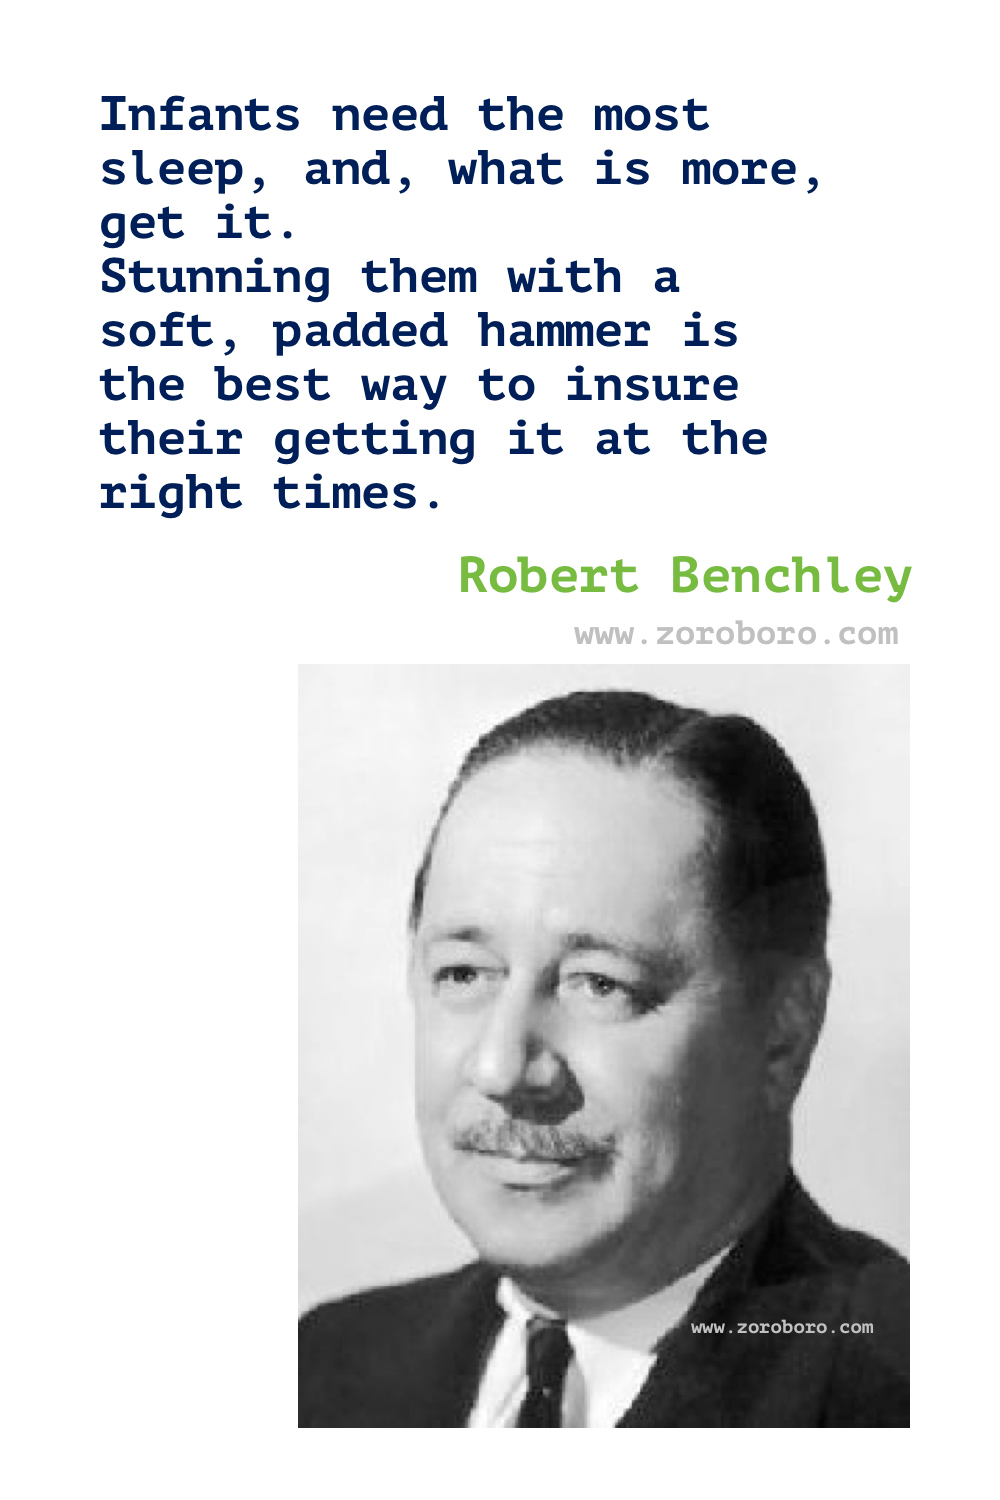 Robert Benchley Quotes. Robert Benchley Comedy Quotes, Dogs Quotes, Funny Quotes, Writing Quotes & Humor Quotes. Robert Benchley Books. Robert Benchley Thoughts.